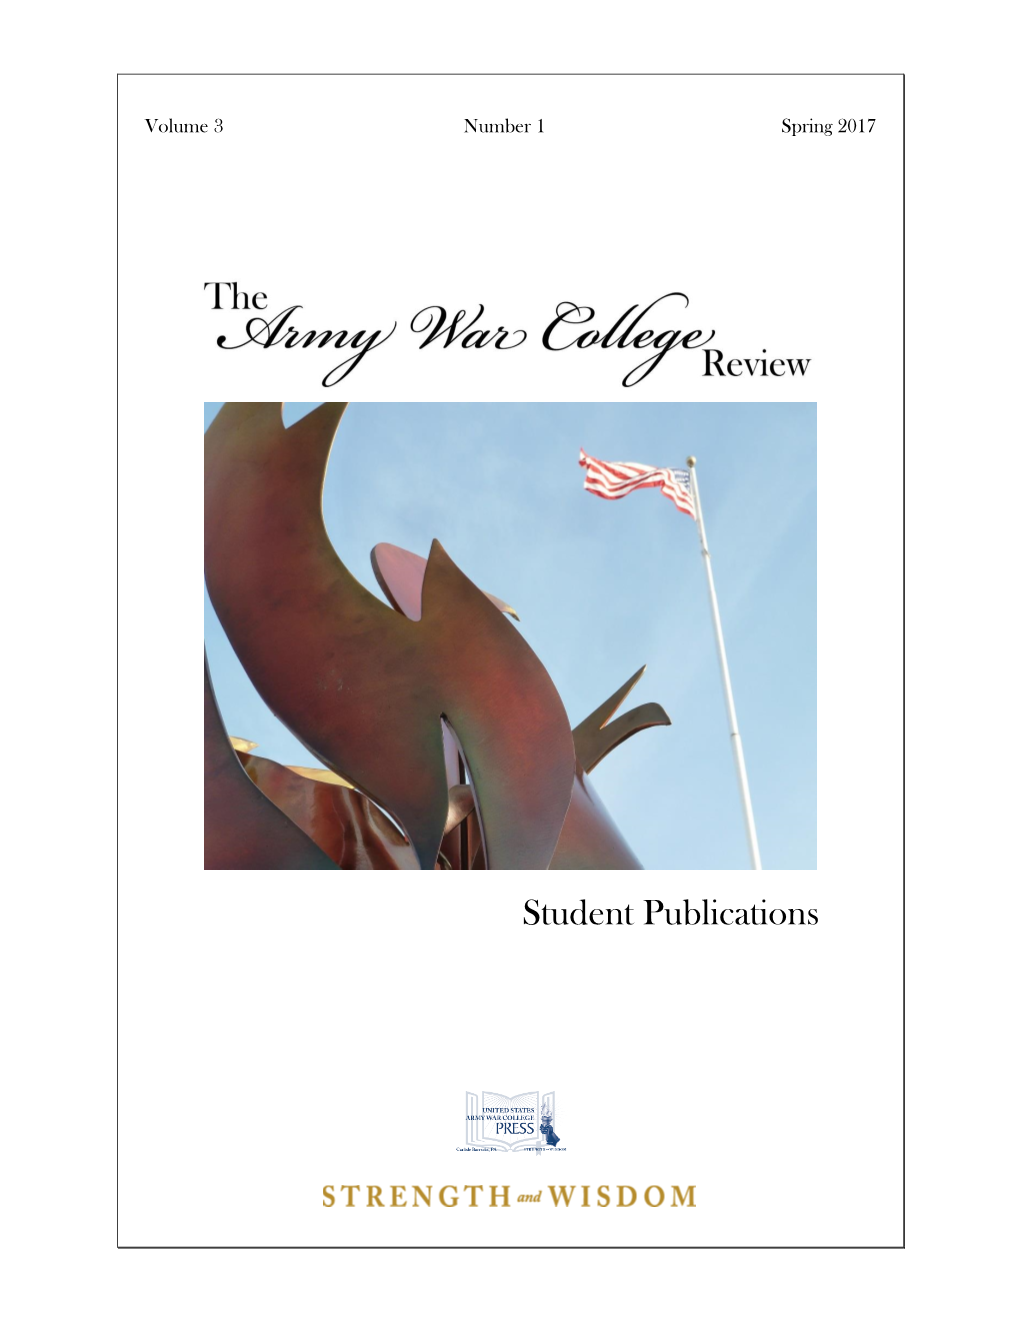 The Army War College Review Vol. 3, No. 1